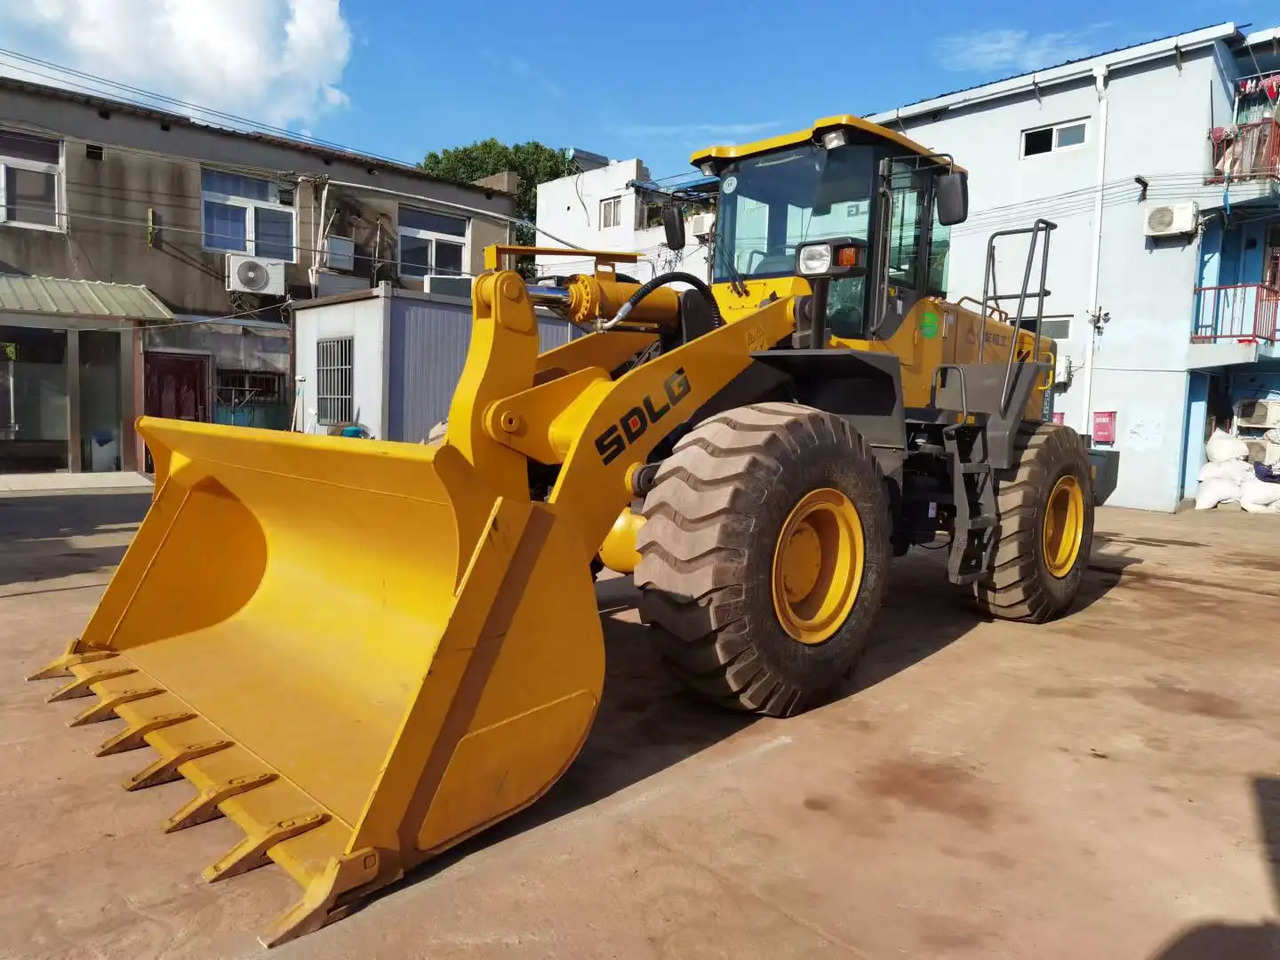 Wheel loader Used SDLlG Wheel loader 936 956 on sale with good running condition